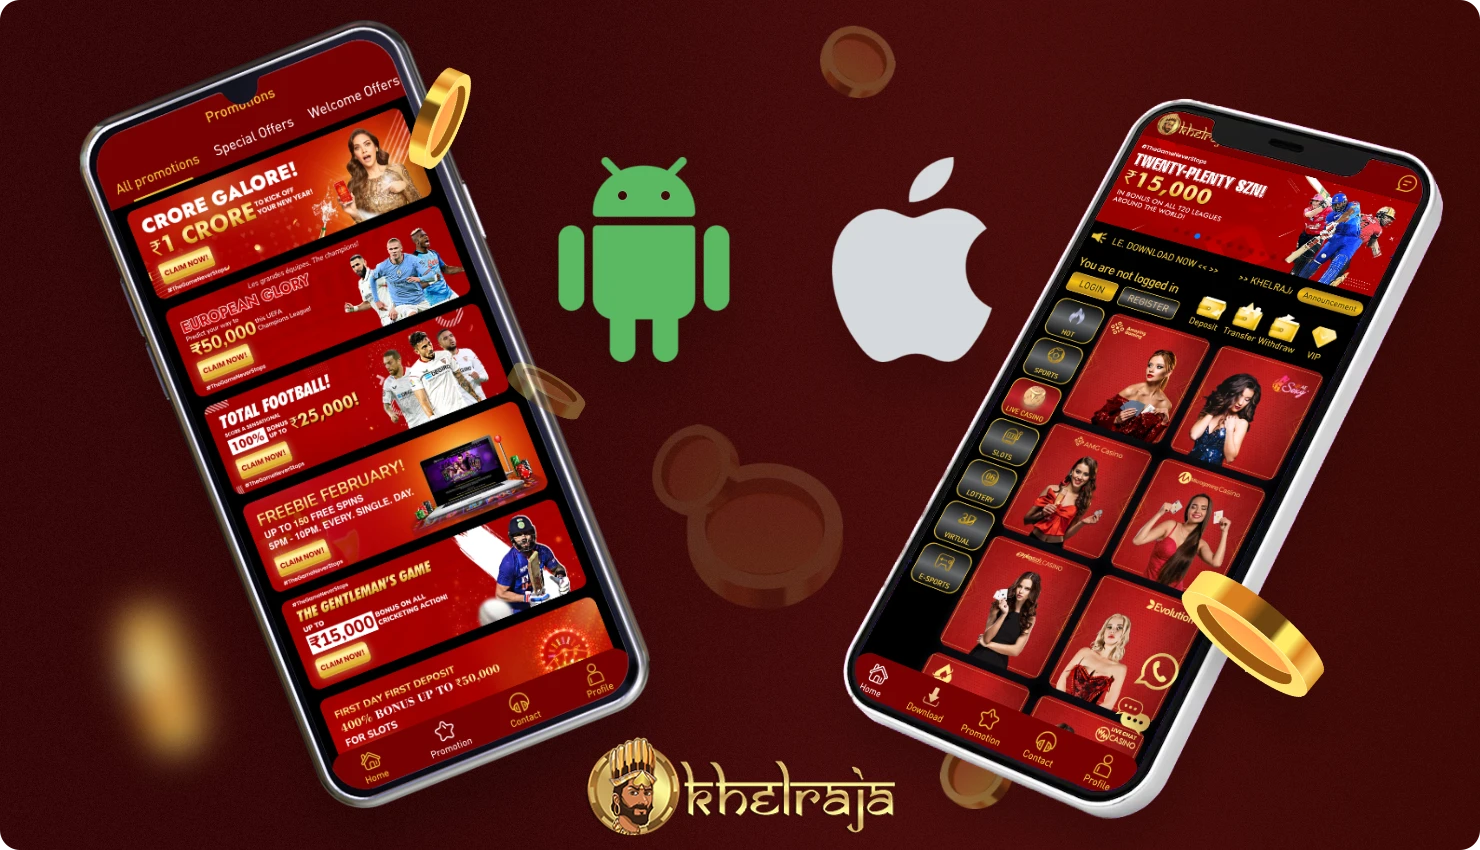 The free Khelraja mobile app is available to users of both Android and iOS devices